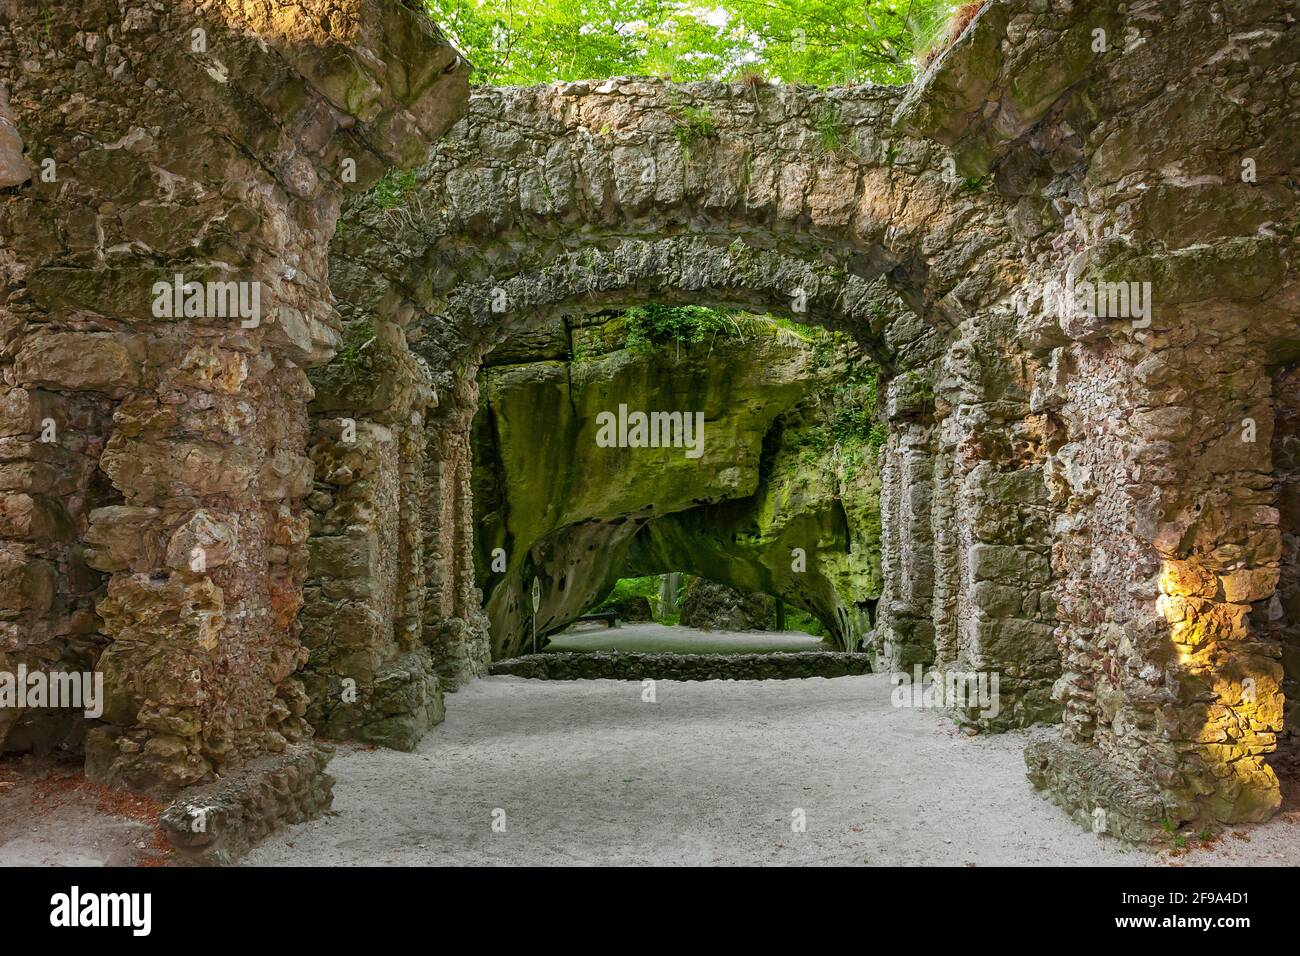 Germany, Bavaria, Wonsees-Sanspareil, ruin theater with a view of the Kalypsogrotto in the 'Felsengarten Sanspareil'. The listed English landscape garden was laid out in the 18th century under Margrave 'Friedrich von Bayreuth' and his wife Margravine 'Wilhelmine von Bayreuth'. Stock Photo